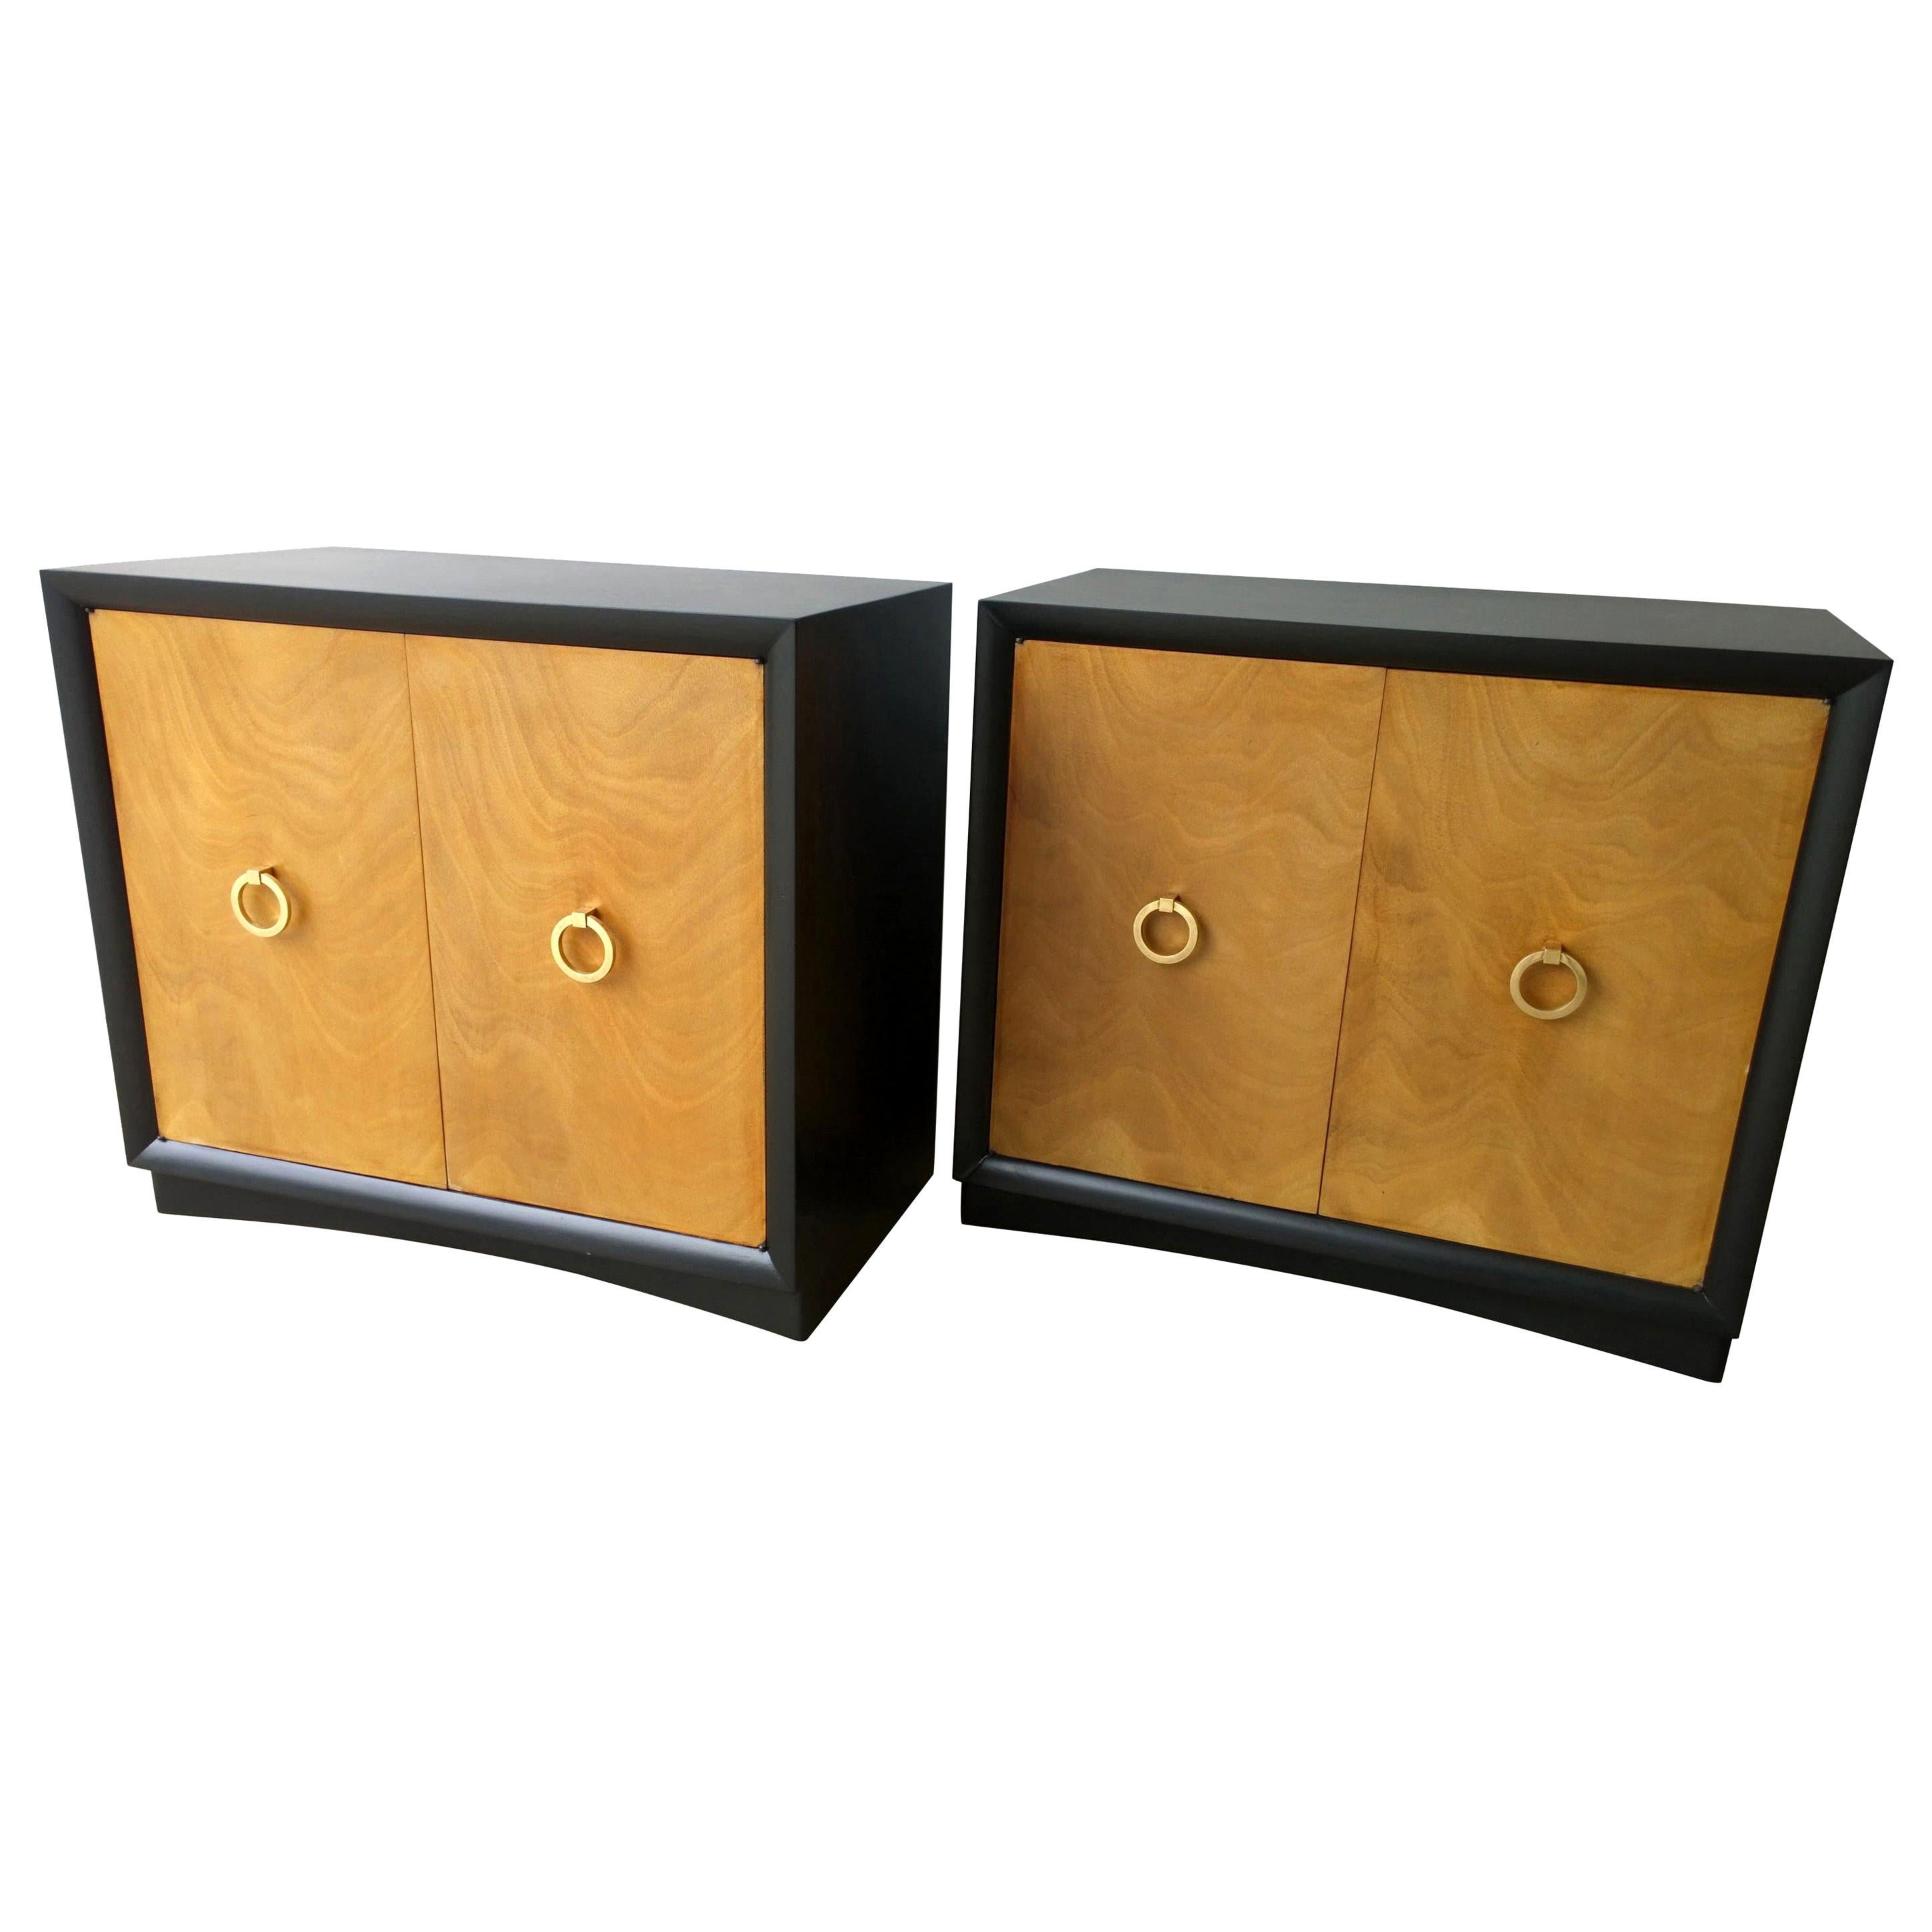 Pair of Black Refinished Wood Frame & Burl Wood Doors with Brass Pulls Cabinets For Sale